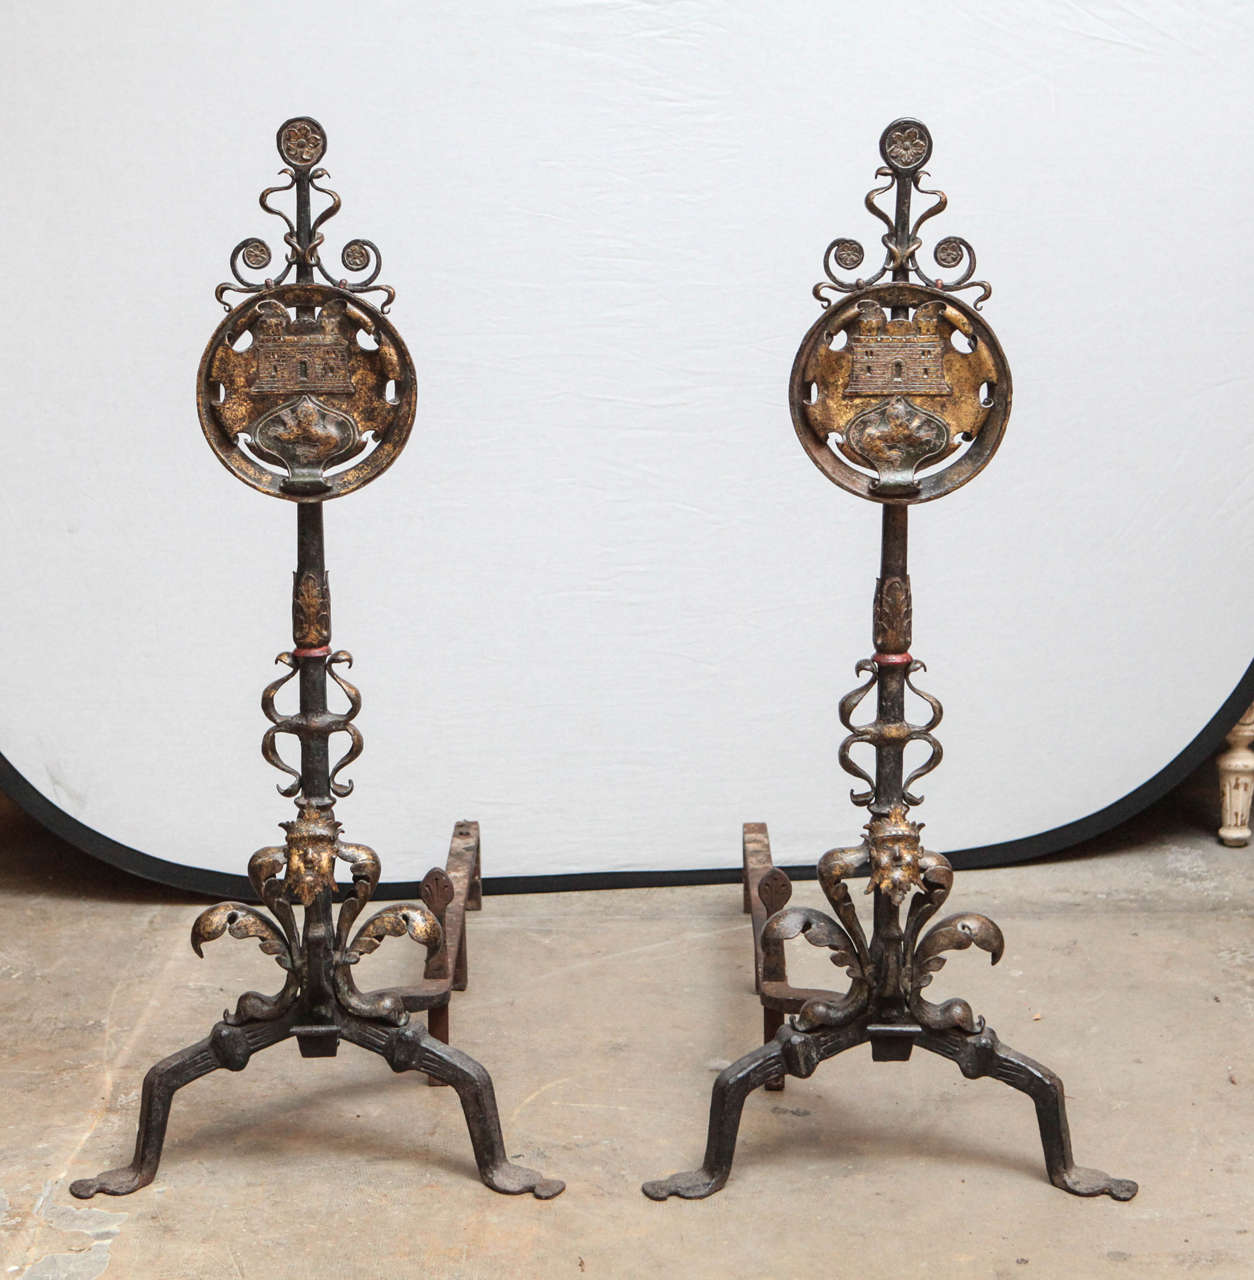 Pair of very fine large 1900s Italian style polychromed iron chenets with face detail. The chenets are signed.